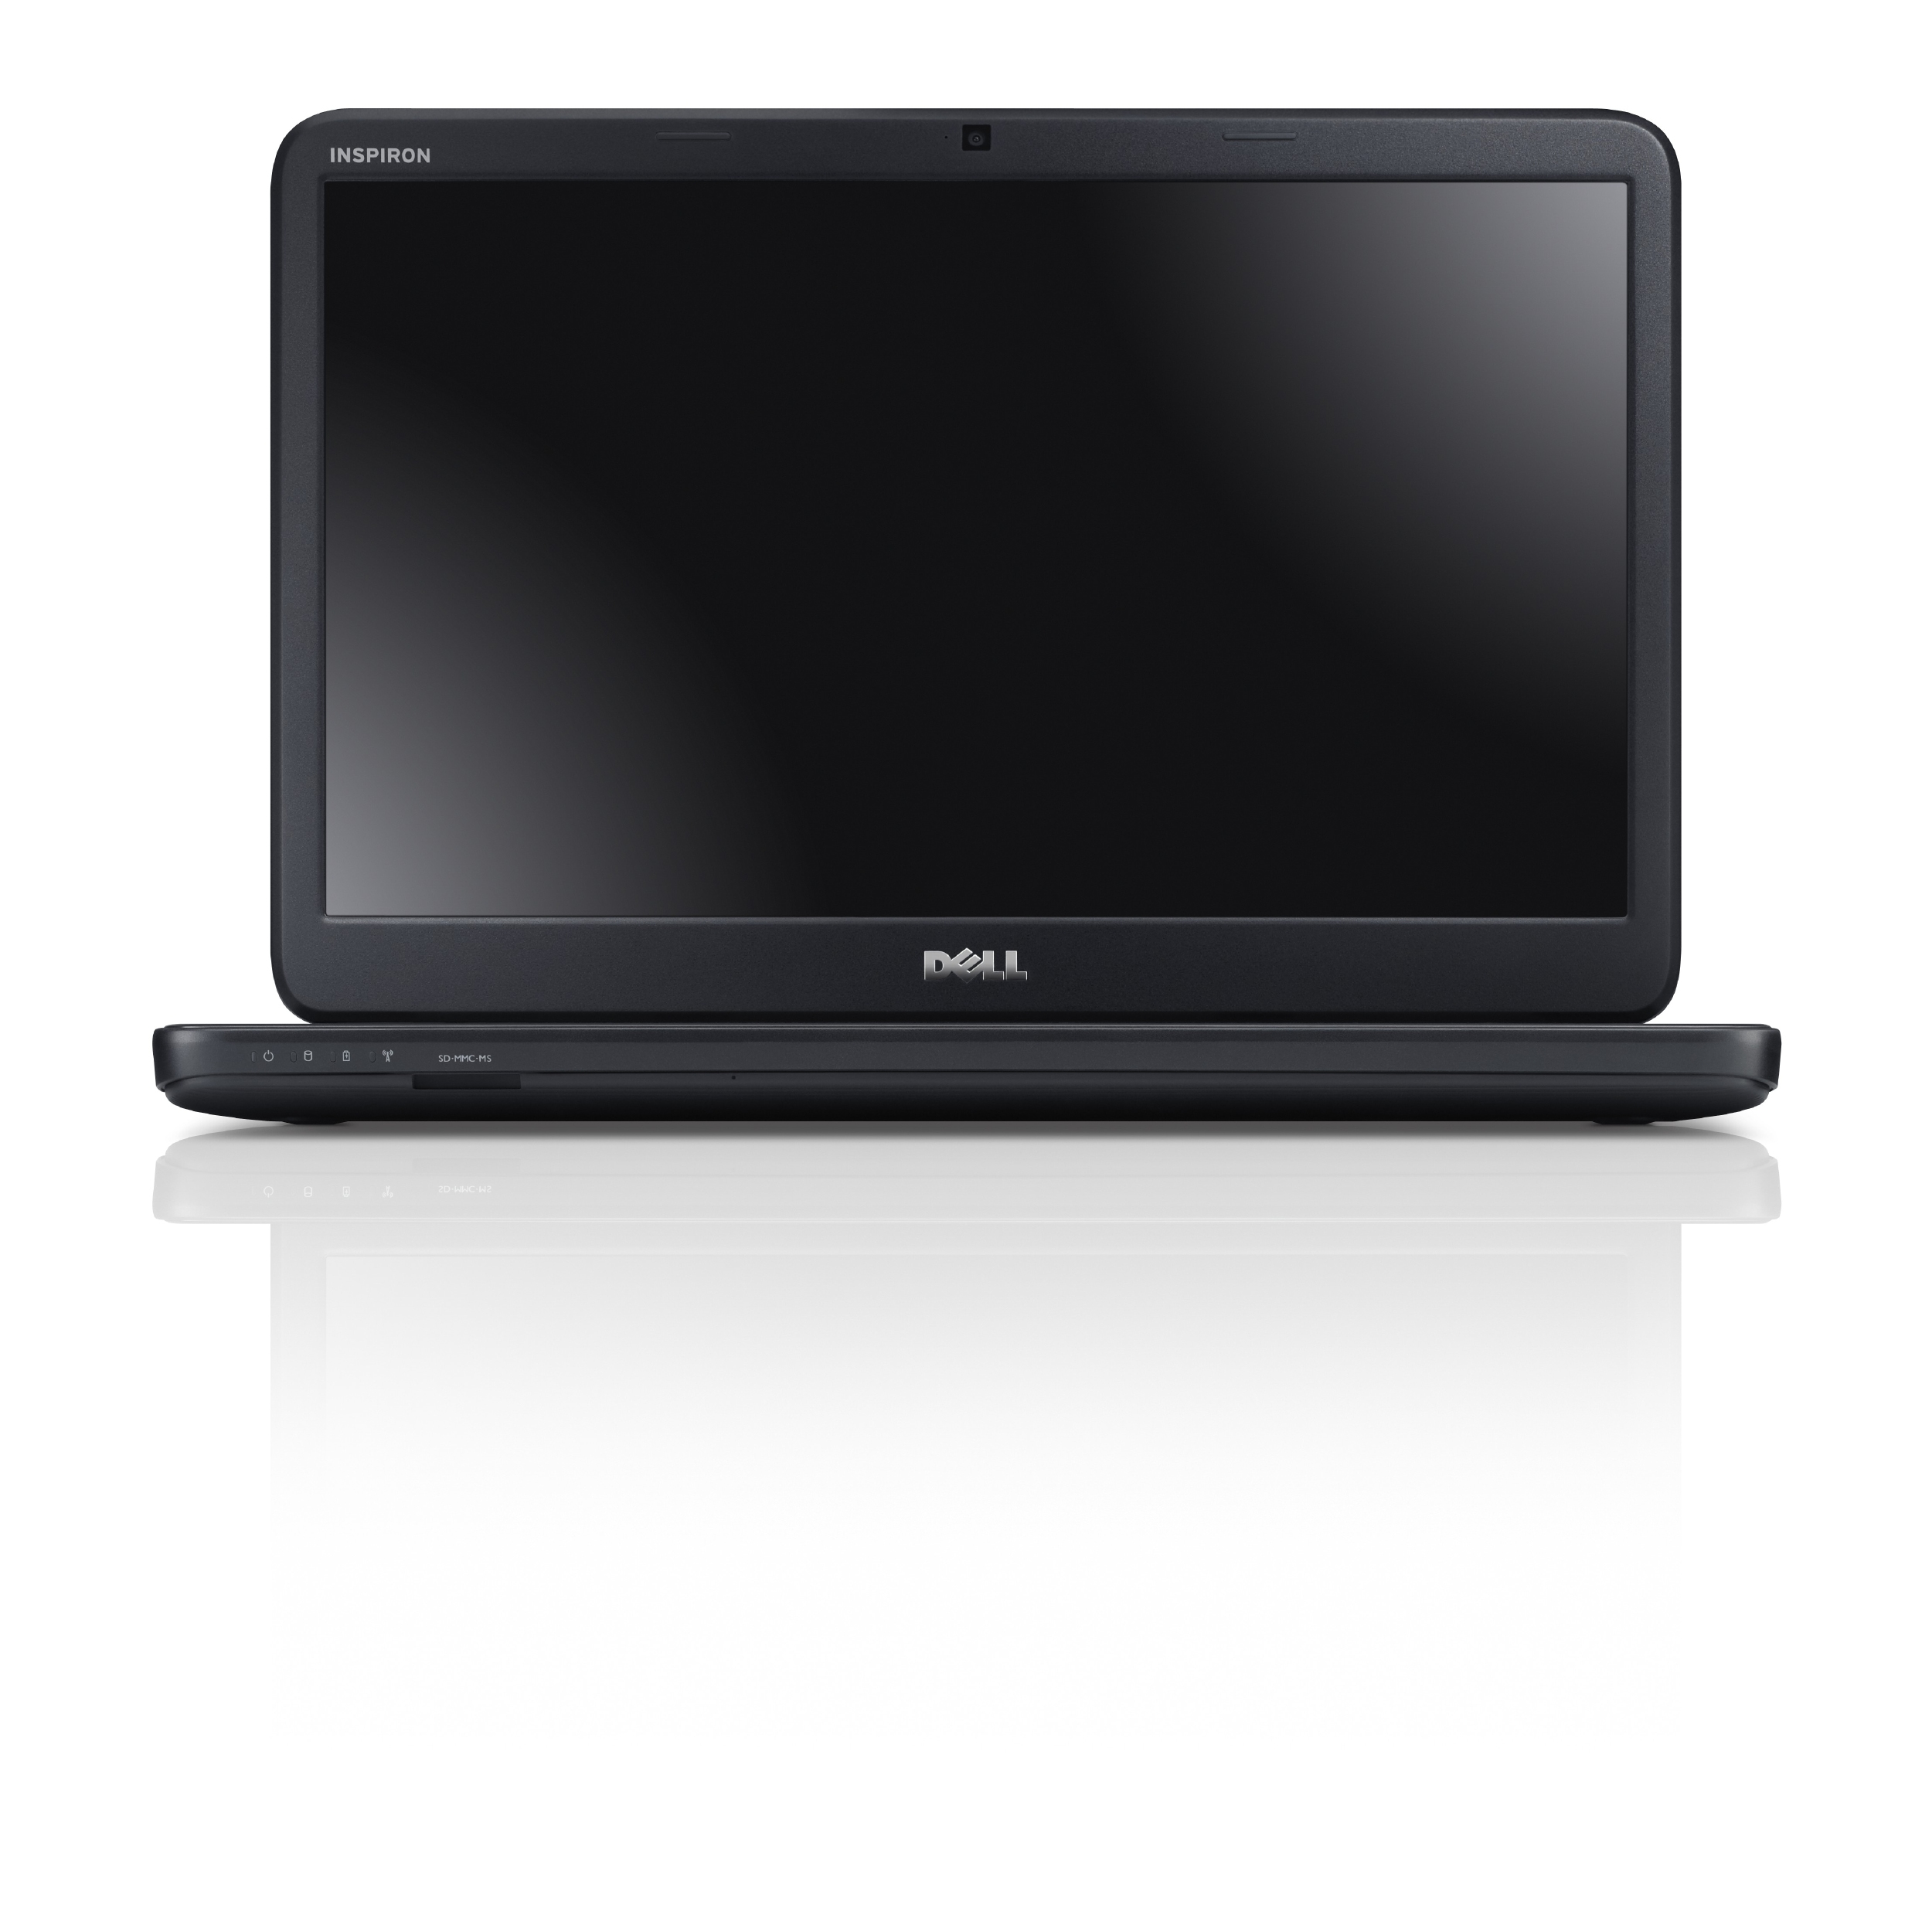 dell drivers for windows 7 64 bit n5110